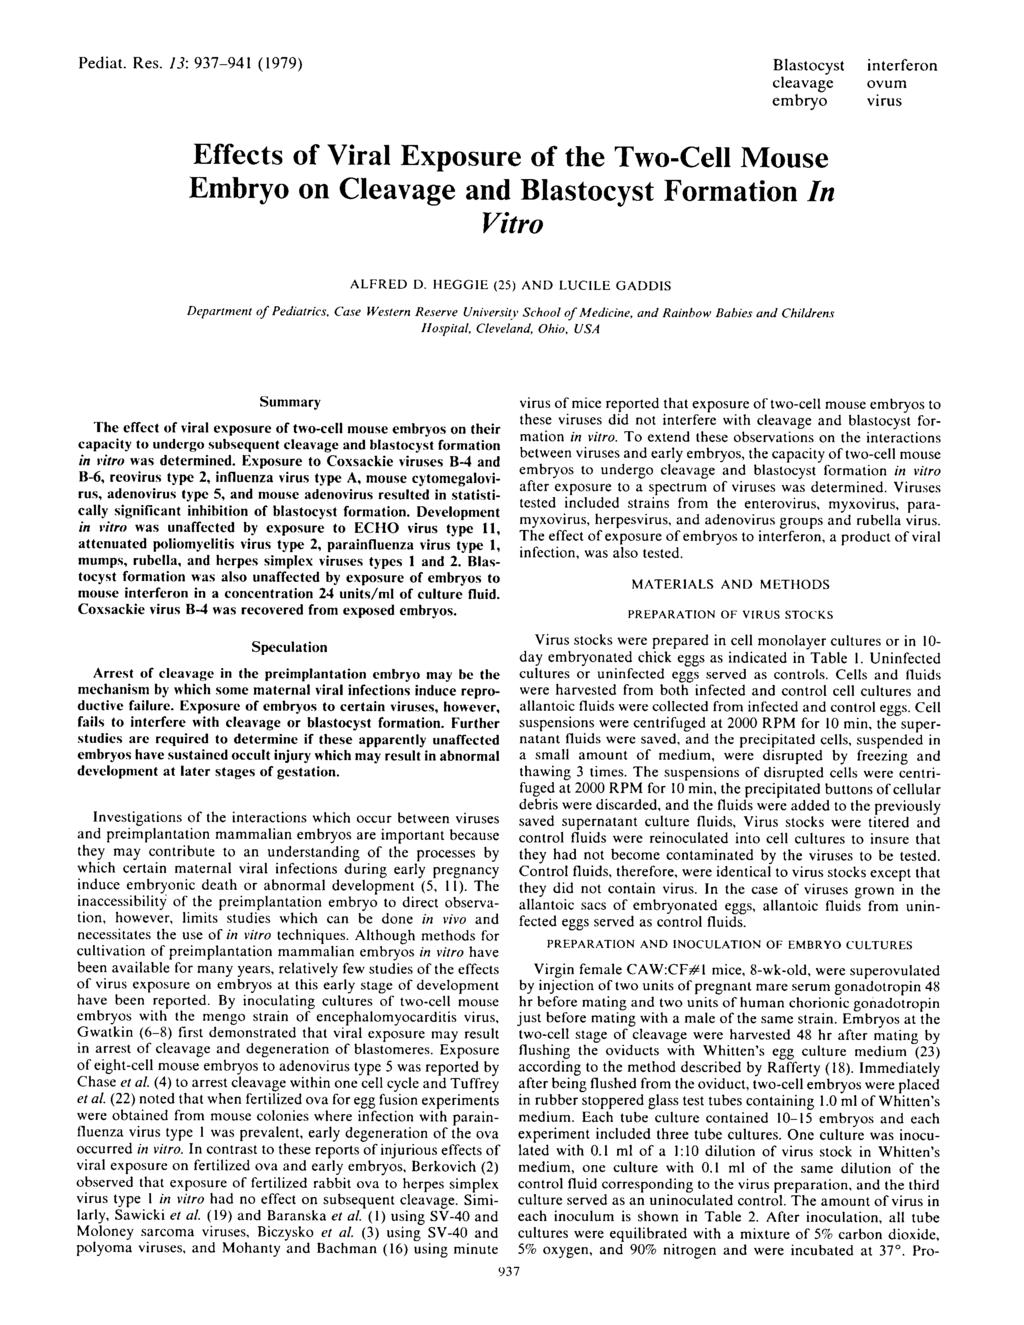 Pediat. Res. 13: 937-941 (1979) Blastocyst interferon cleavage ovum embryo virus Effects of Viral Exposure of the Two-Cell Mouse Embryo on Cleavage and Blastocyst Formation In Vitro ALFRED D.